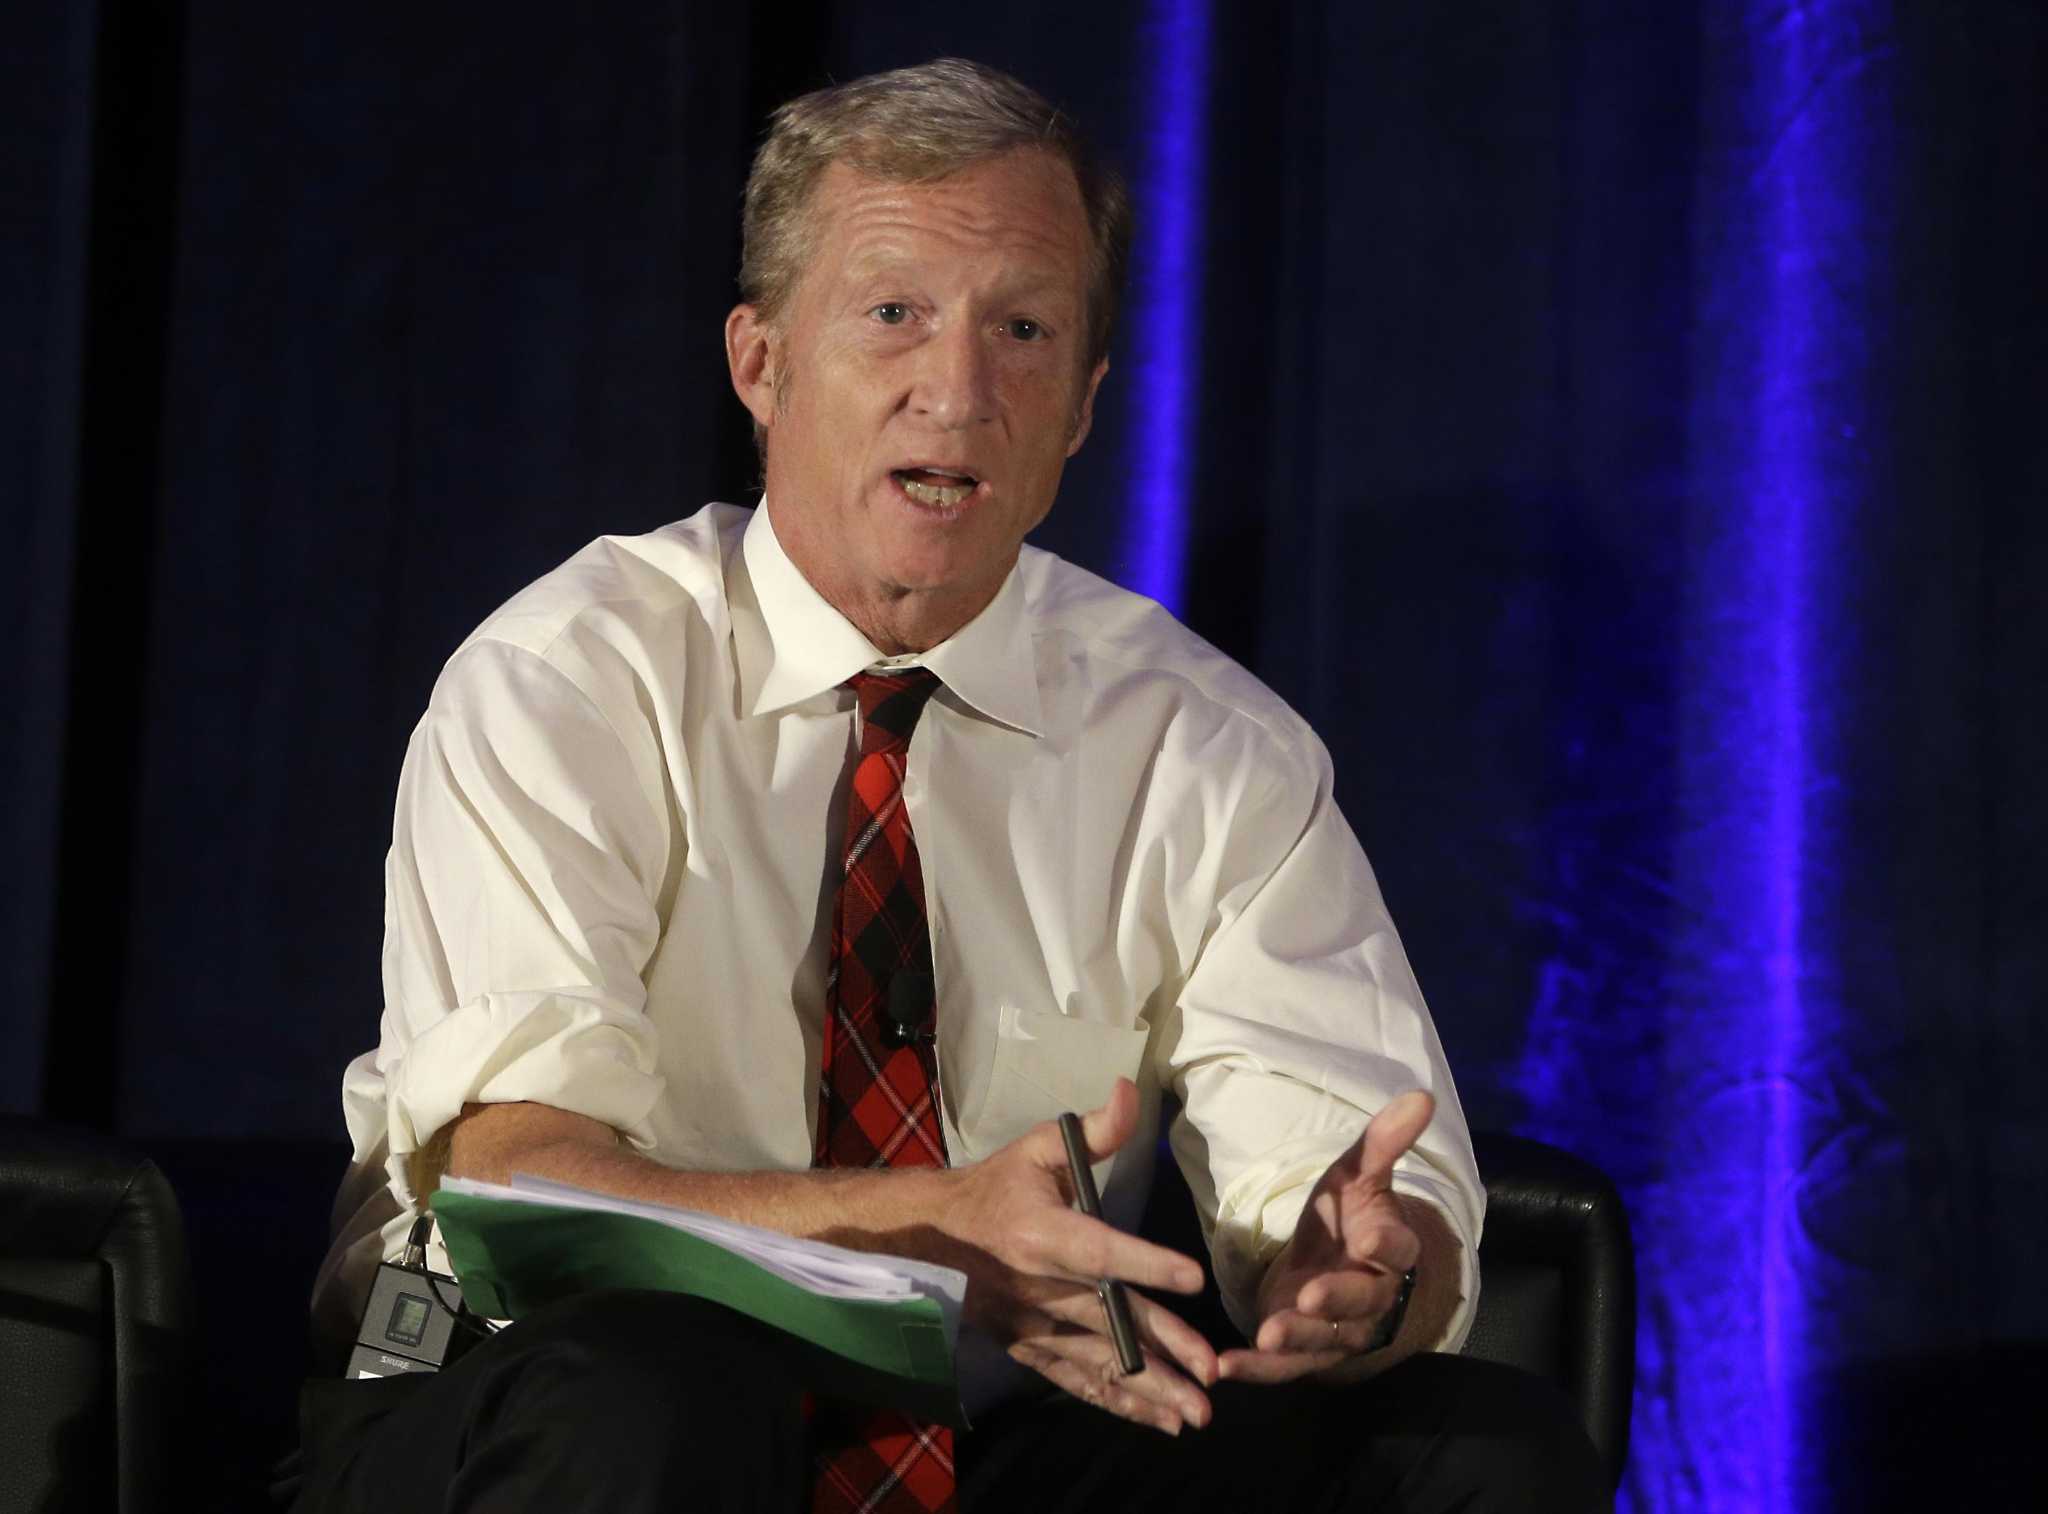 Tom Steyer-led group issues report on tackling income inequality - SFGate